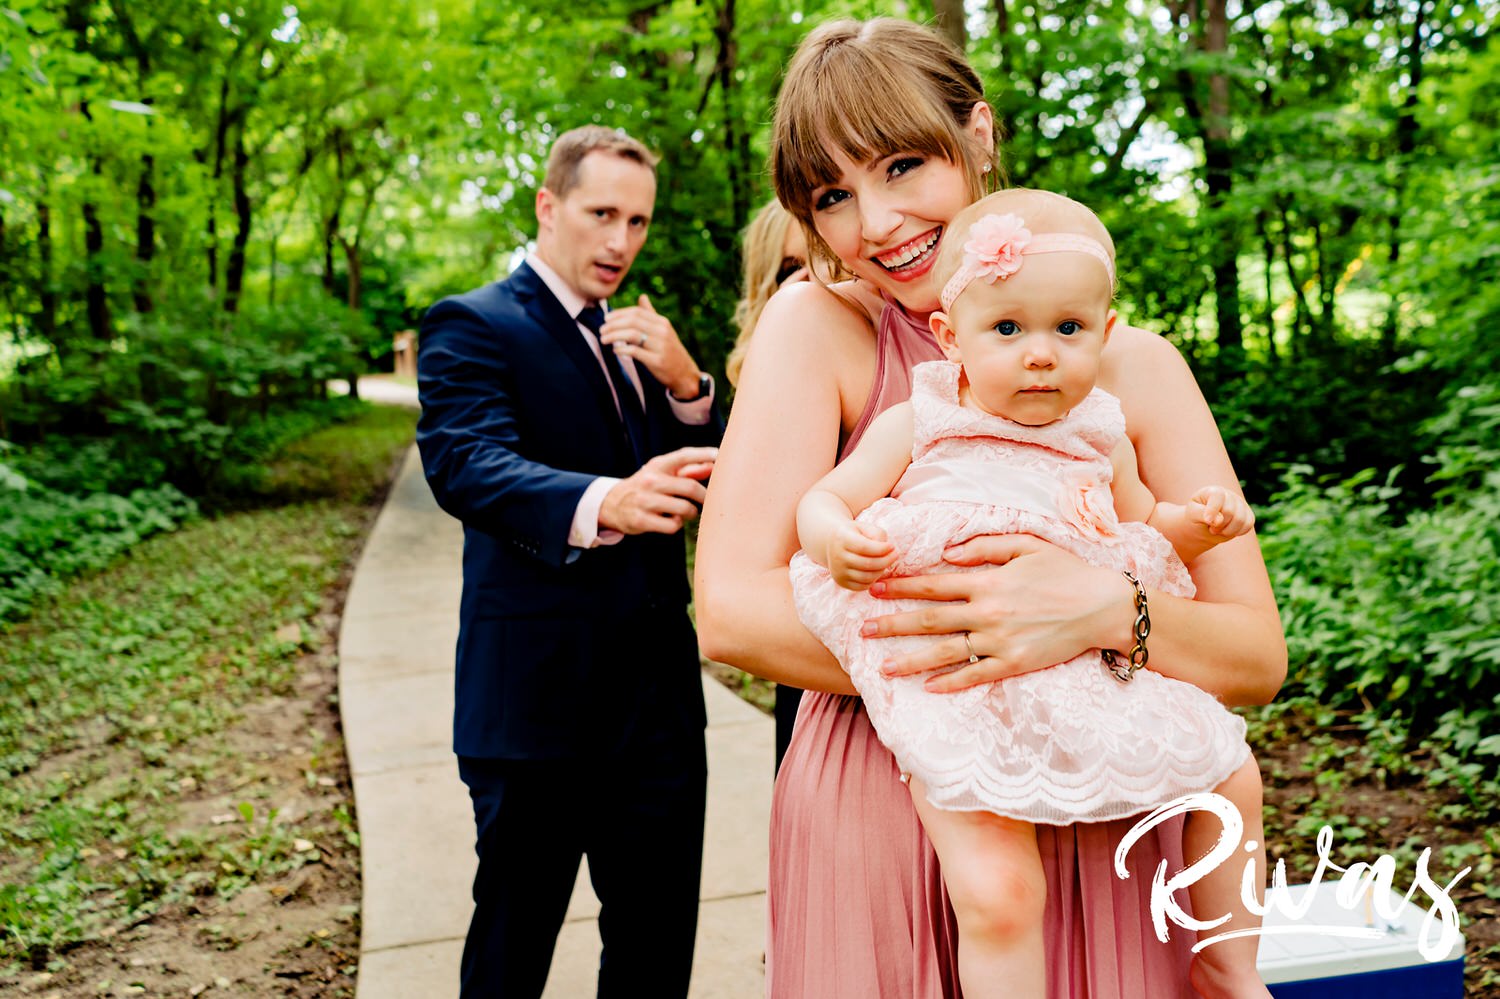 A candid photo of a woman in a pink dress holding a baby in a pink dress as they both smile and look at the camera. 